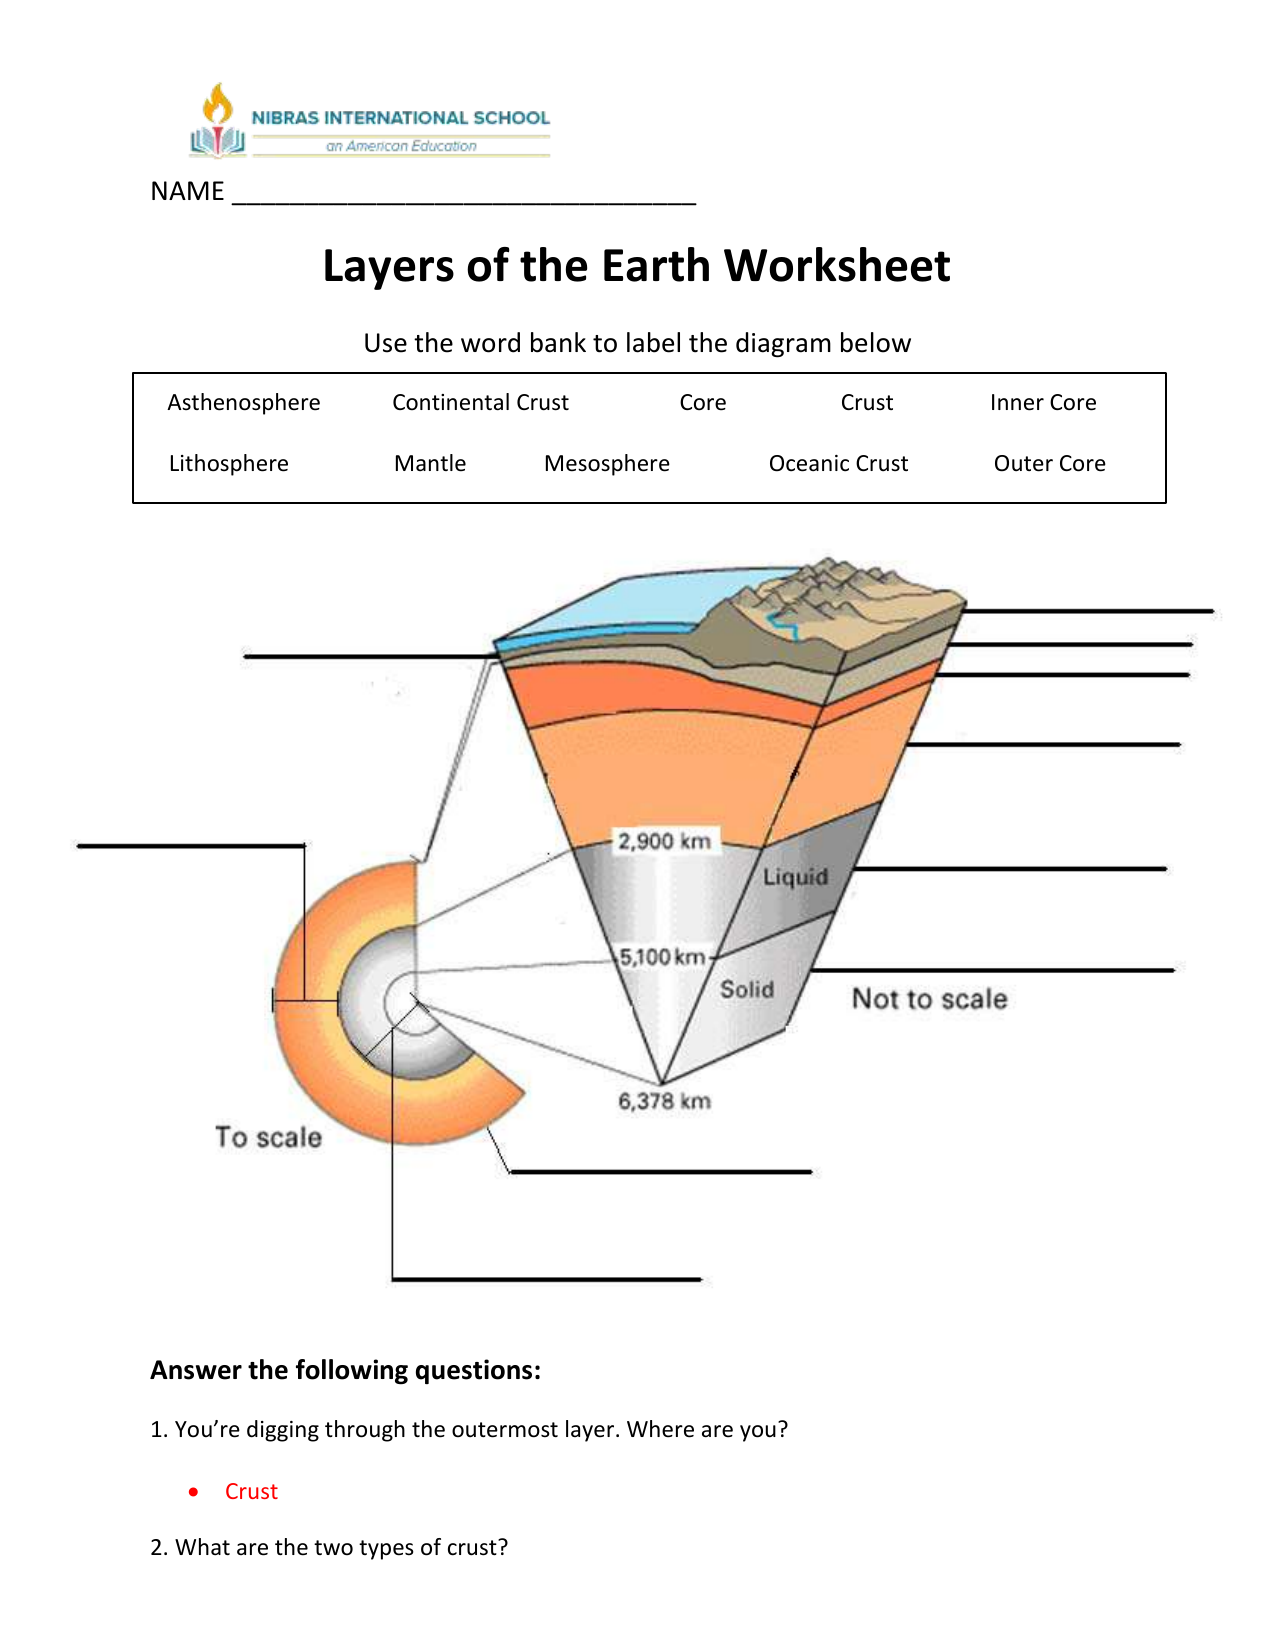 Layers of the Earth Answers For Layers Of The Earth Worksheet